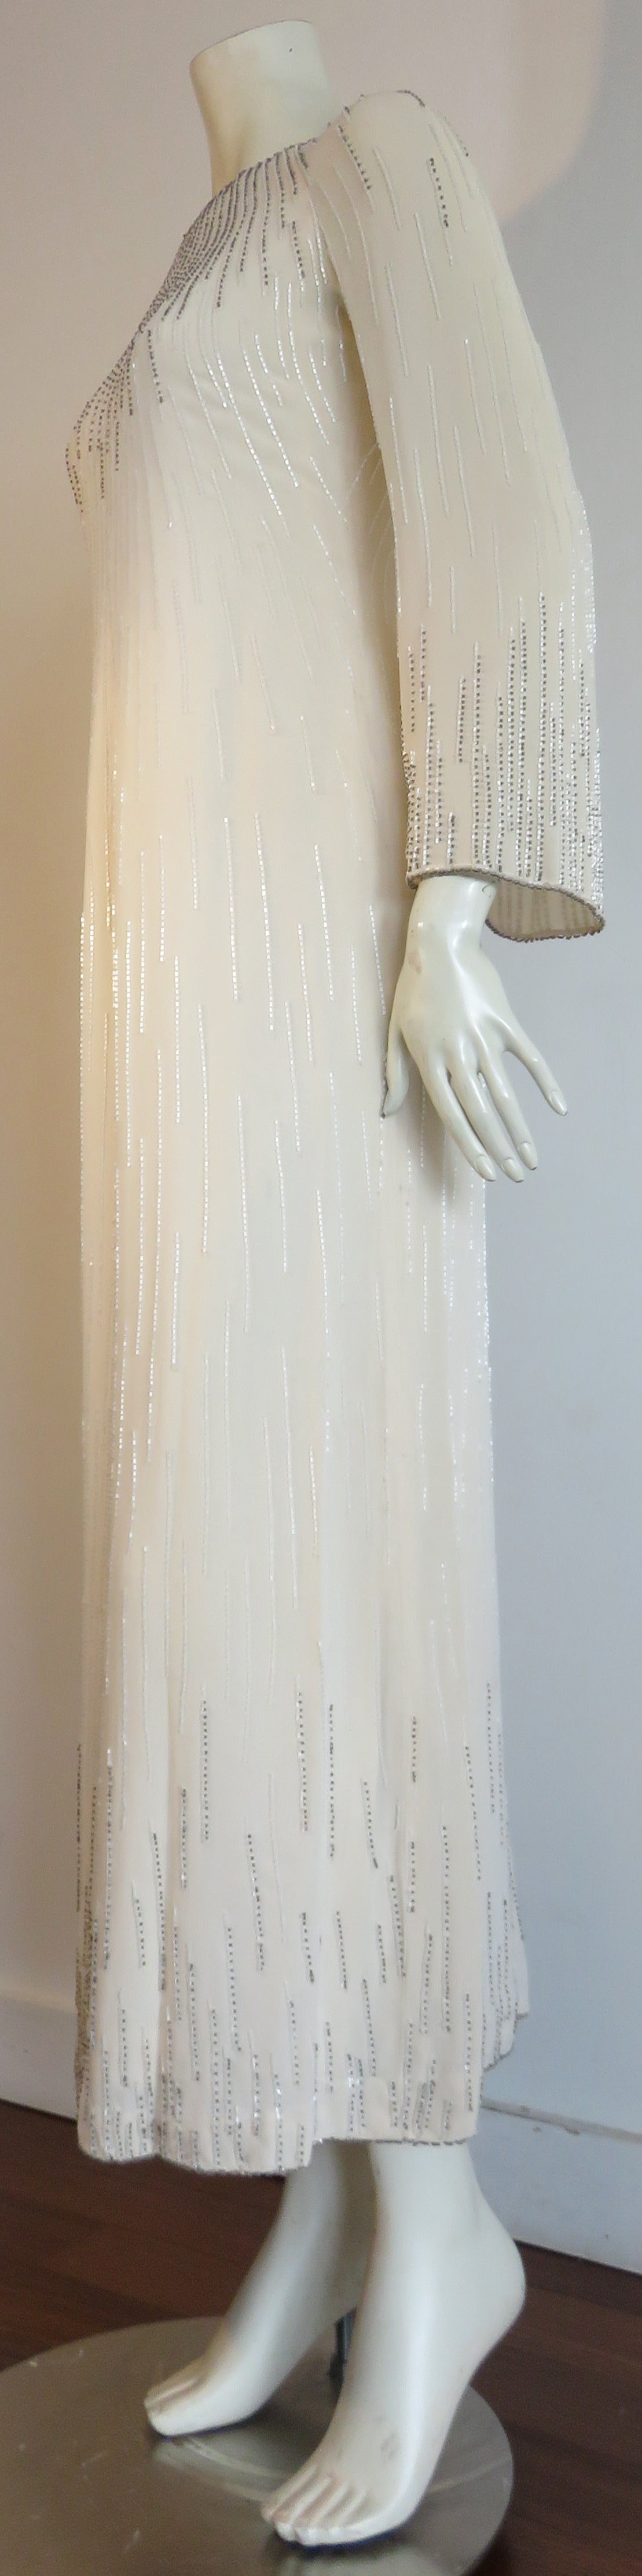 1970's GUY LAROCHE Haute Couture beaded evening gown dress In Excellent Condition For Sale In Newport Beach, CA